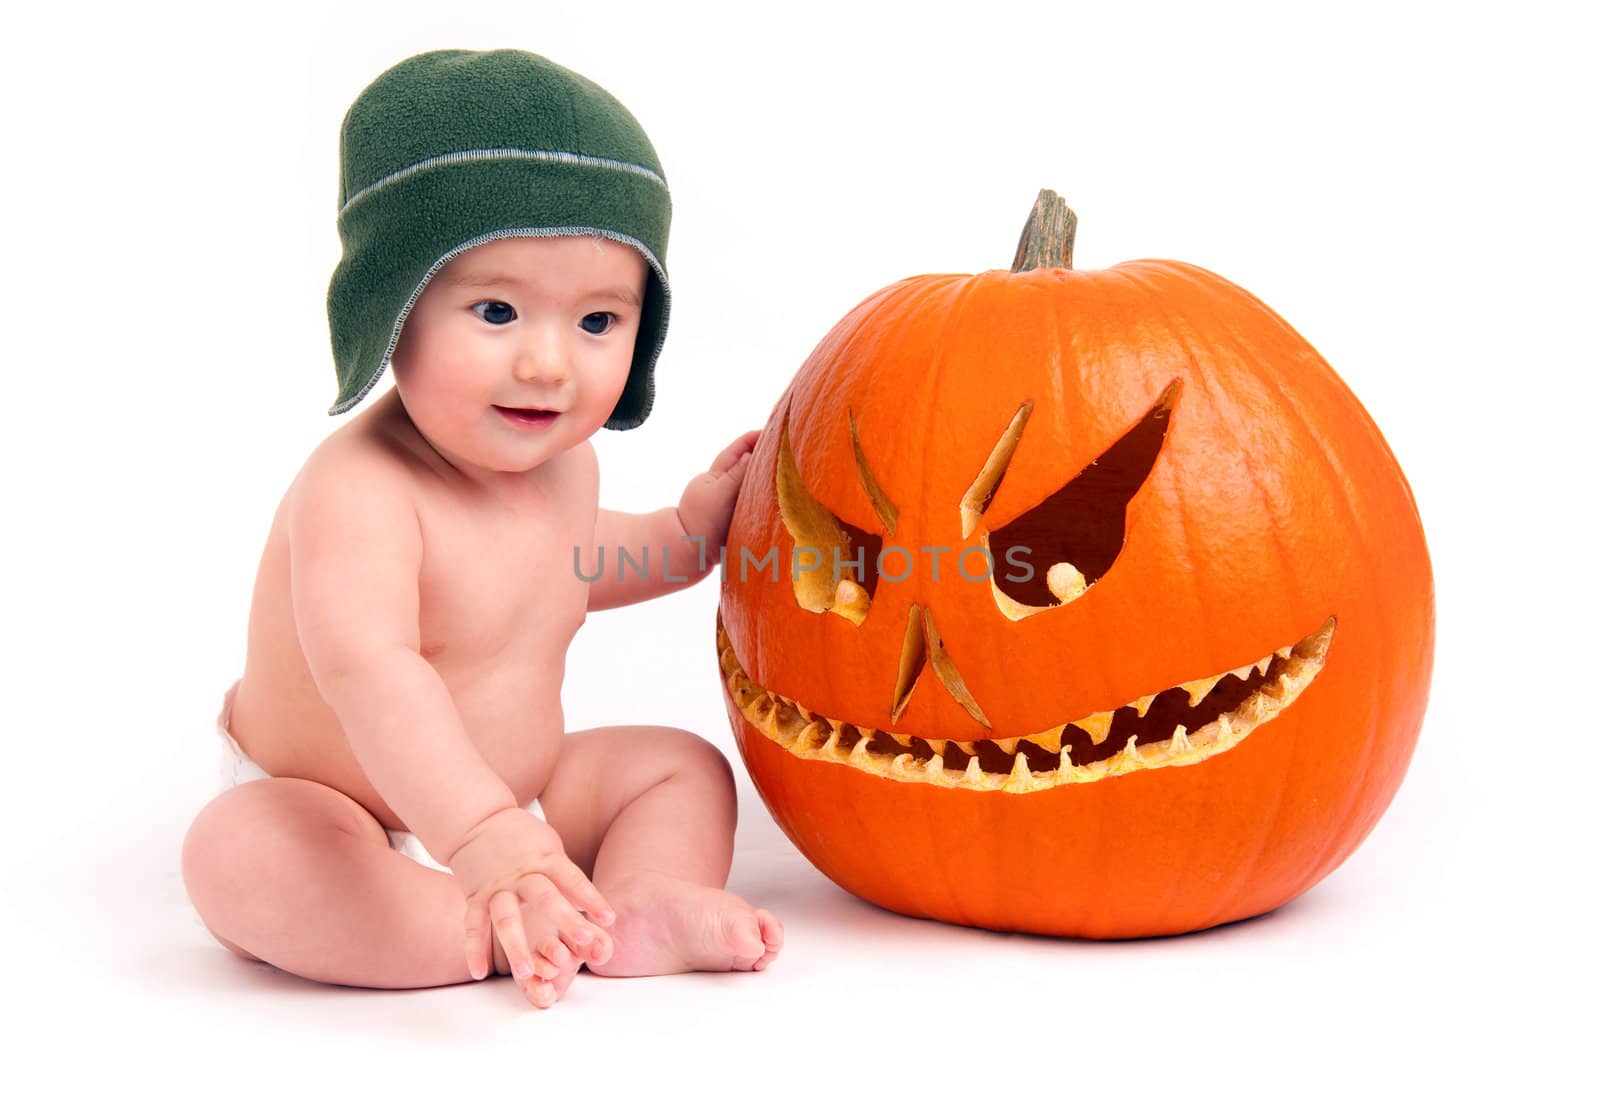 Young male sits next to a pumpkin on white